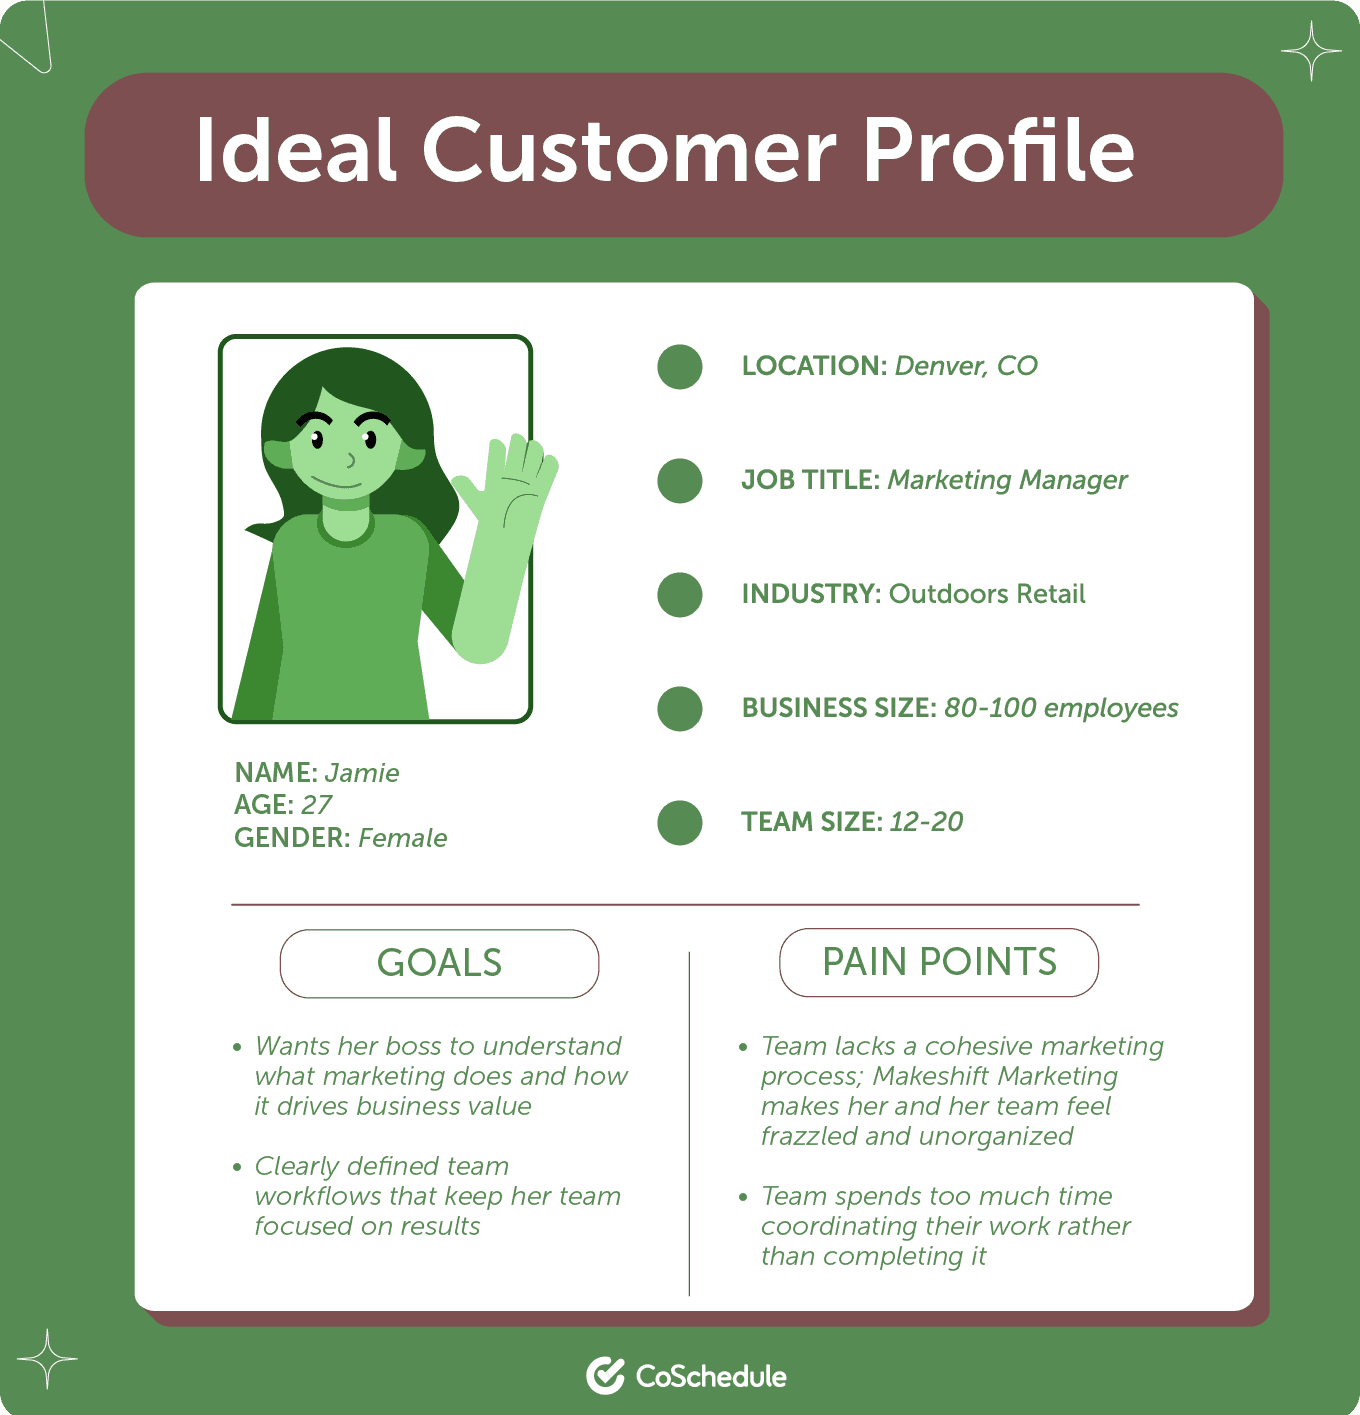 Example of an ideal customer profile